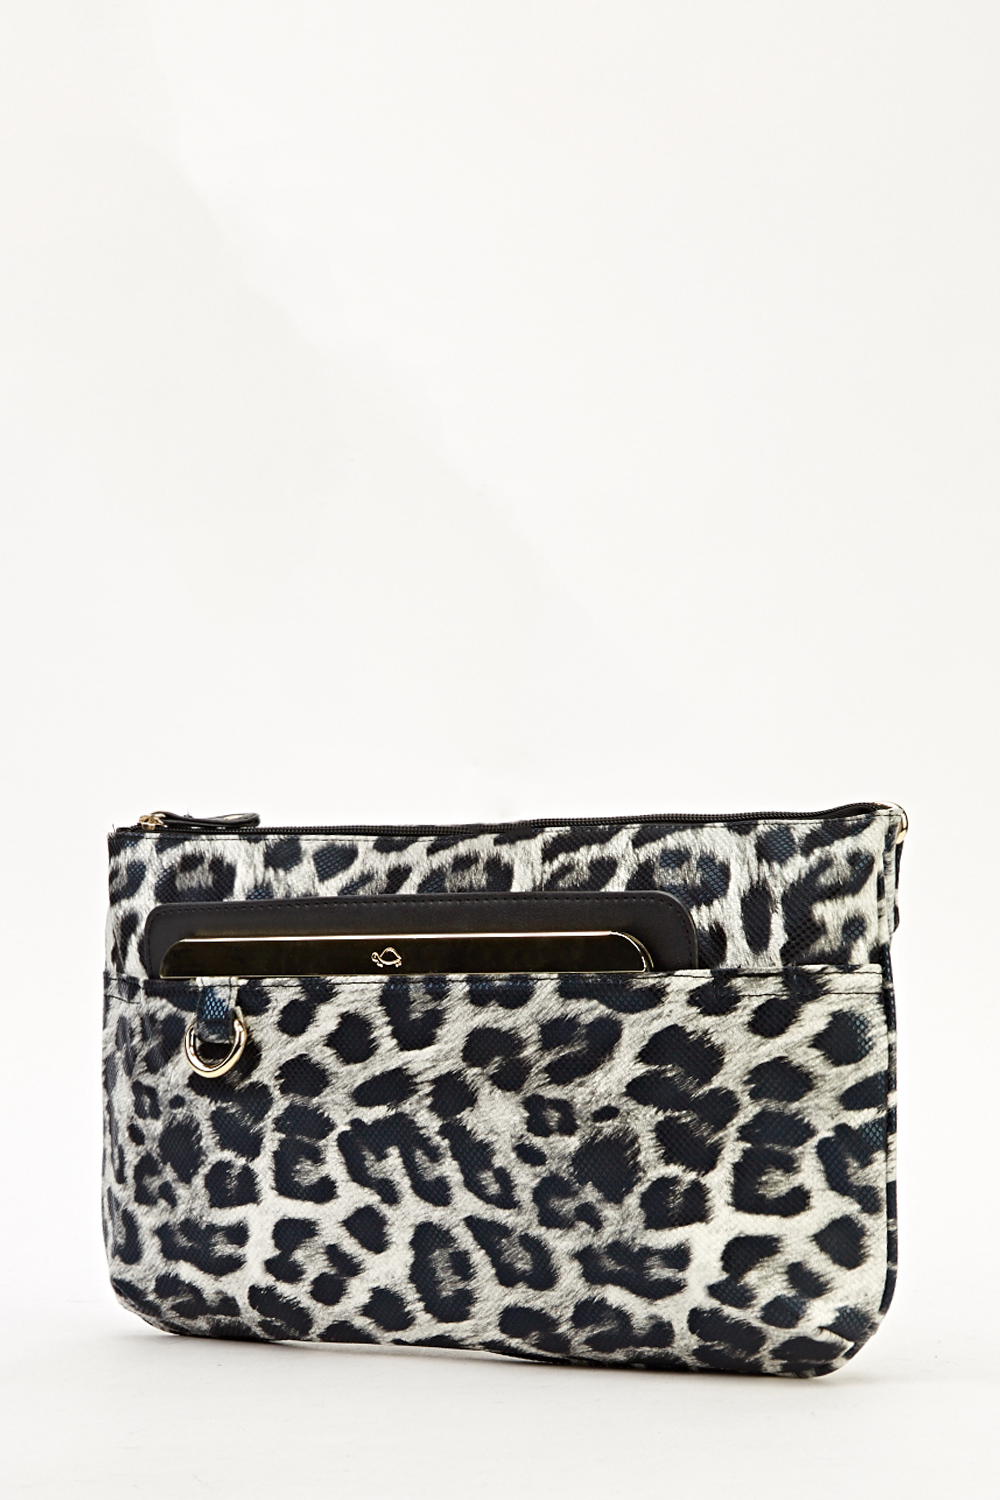 Animal Print Holographic Clutch Bag - Just $6